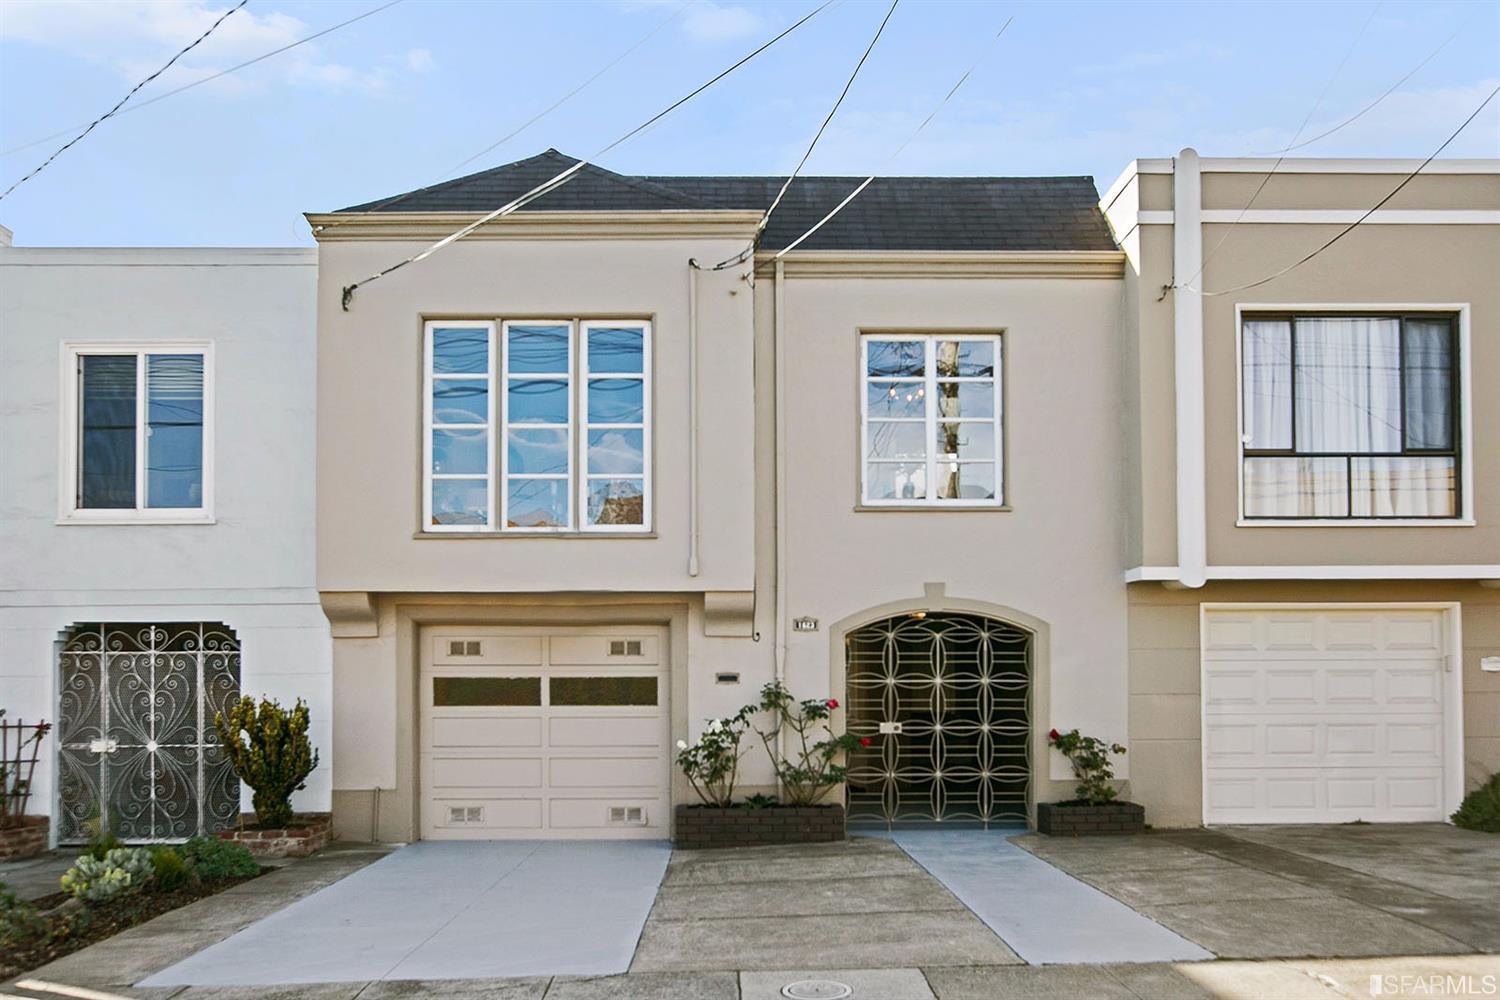 $682,000 Over Asking in the Outer Sunset to End the Year